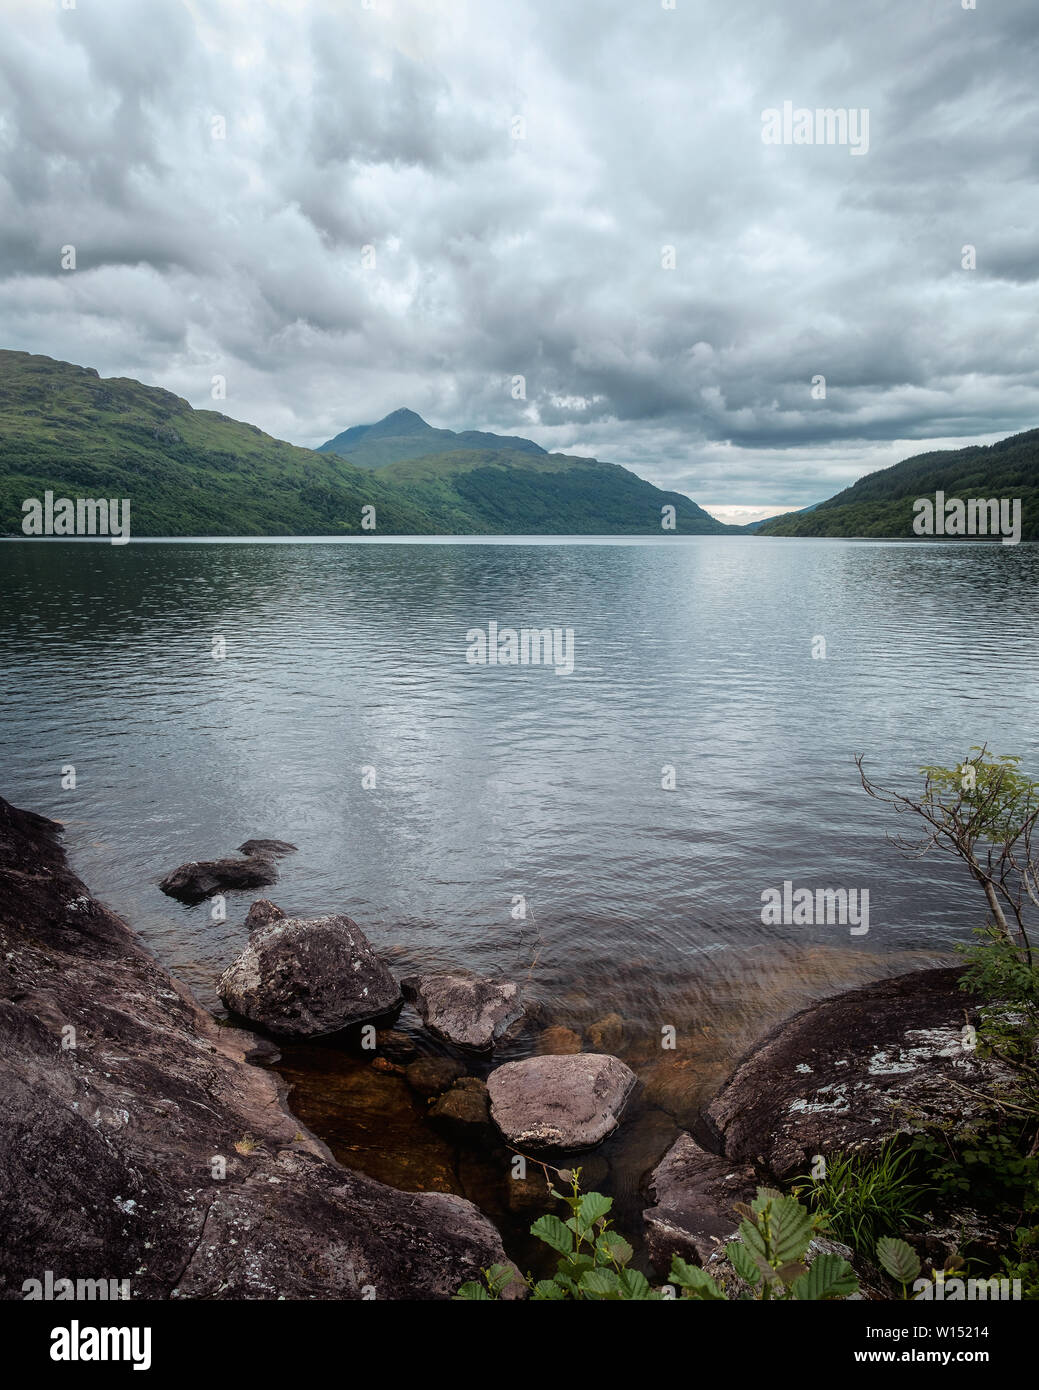 Scottish landscape on a lake with a stone shore and green mountains. Summer 2019. Loch Lomond, Scotland Stock Photo